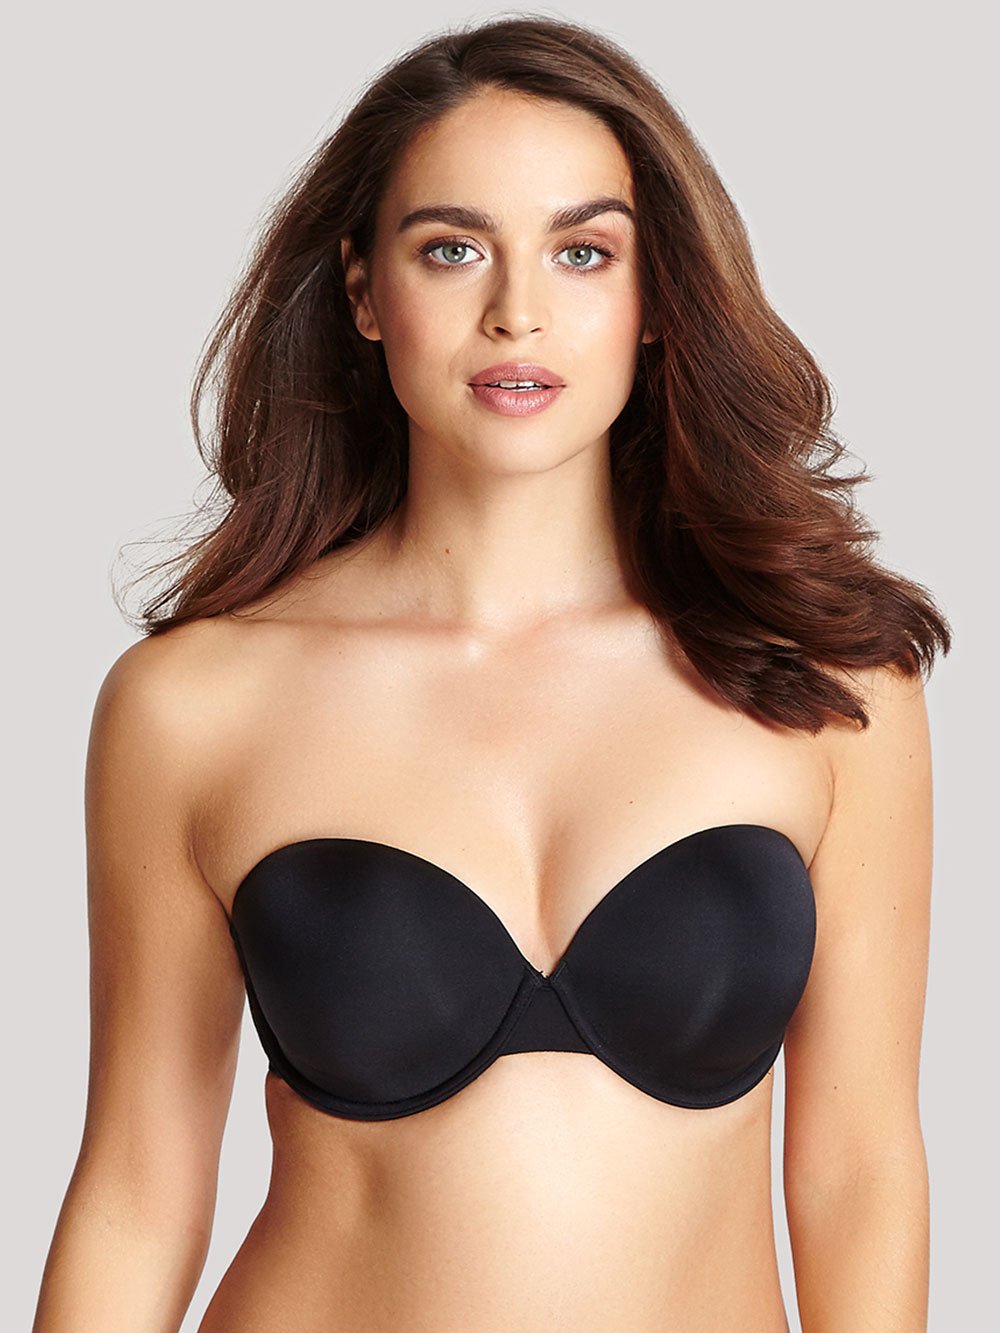 D Cup Bra: Bras for D Cup Boobs and Breast Size Tagged Strapless Bralette  - HauteFlair